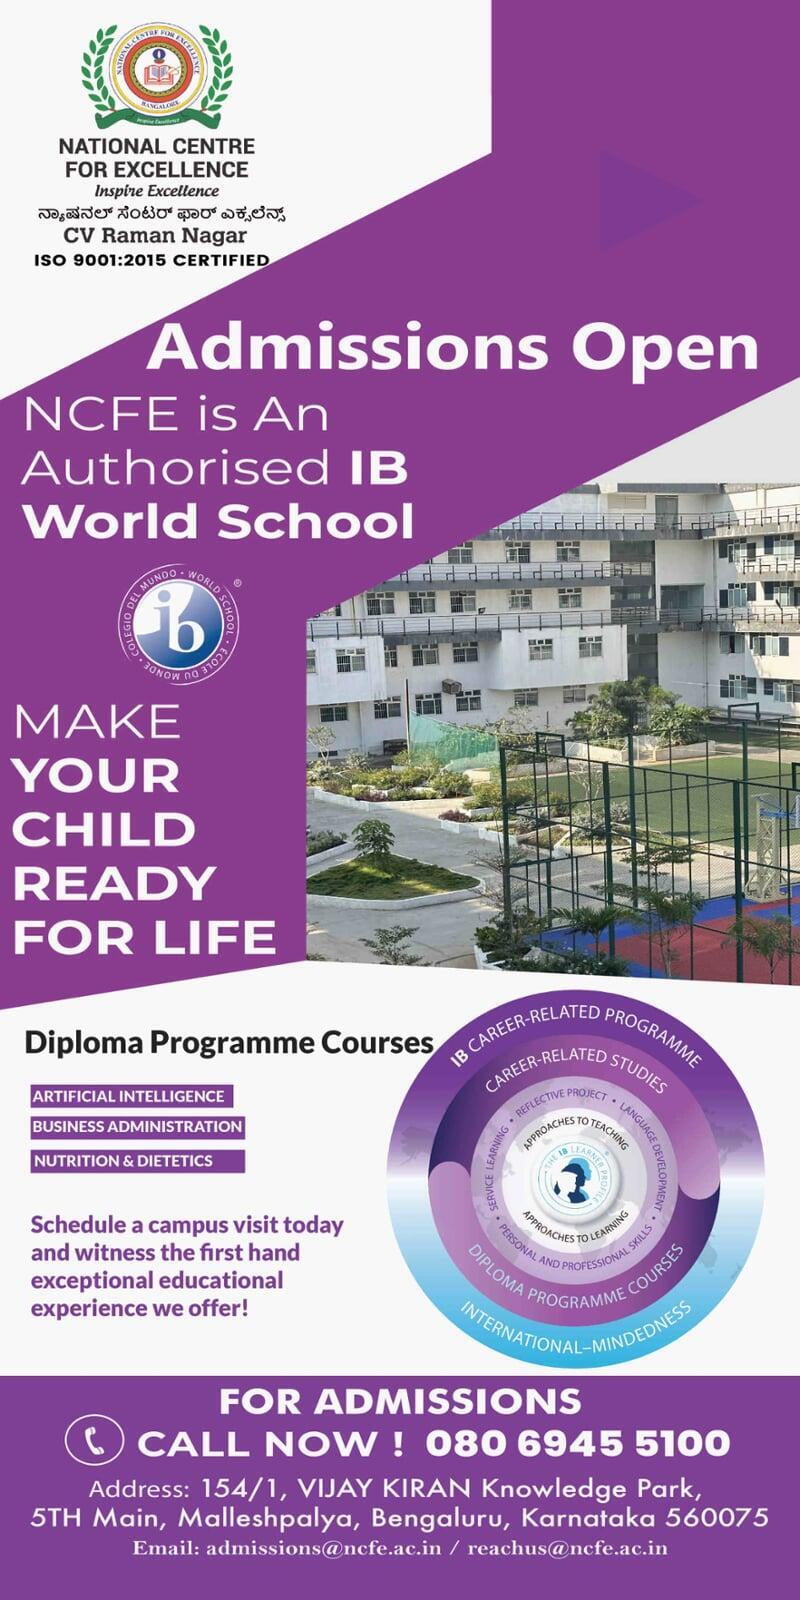 National Centre for Excellence - Core Components of IB